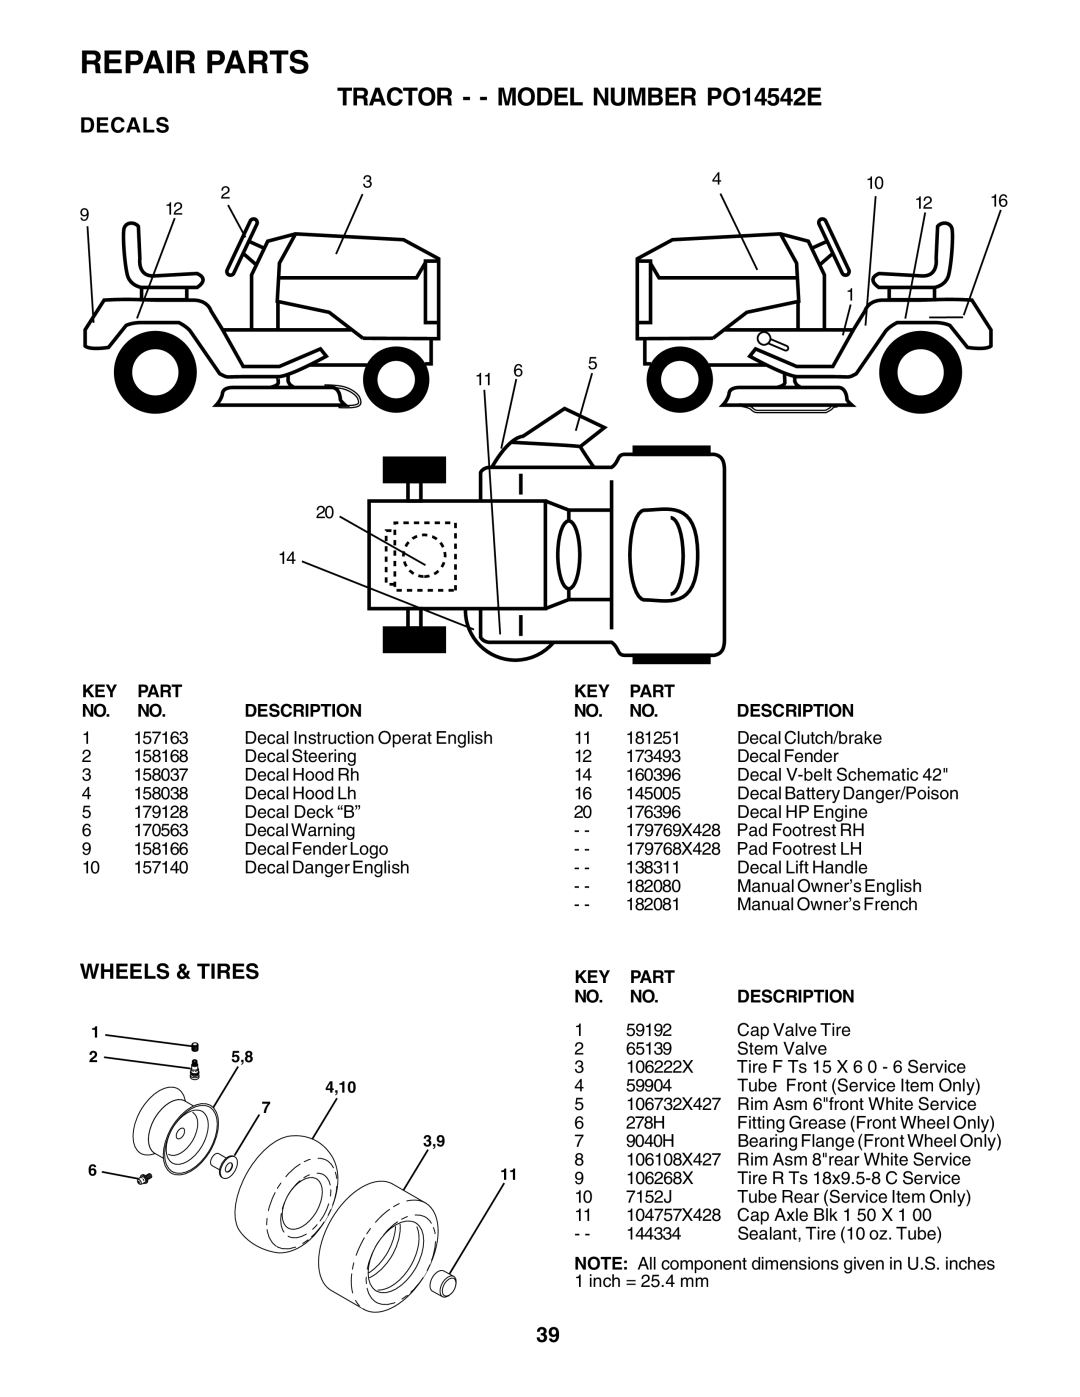 Poulan 182080 manual Decals, Wheels & Tires, Repair Parts, TRACTOR - - MODEL NUMBER PO14542E 